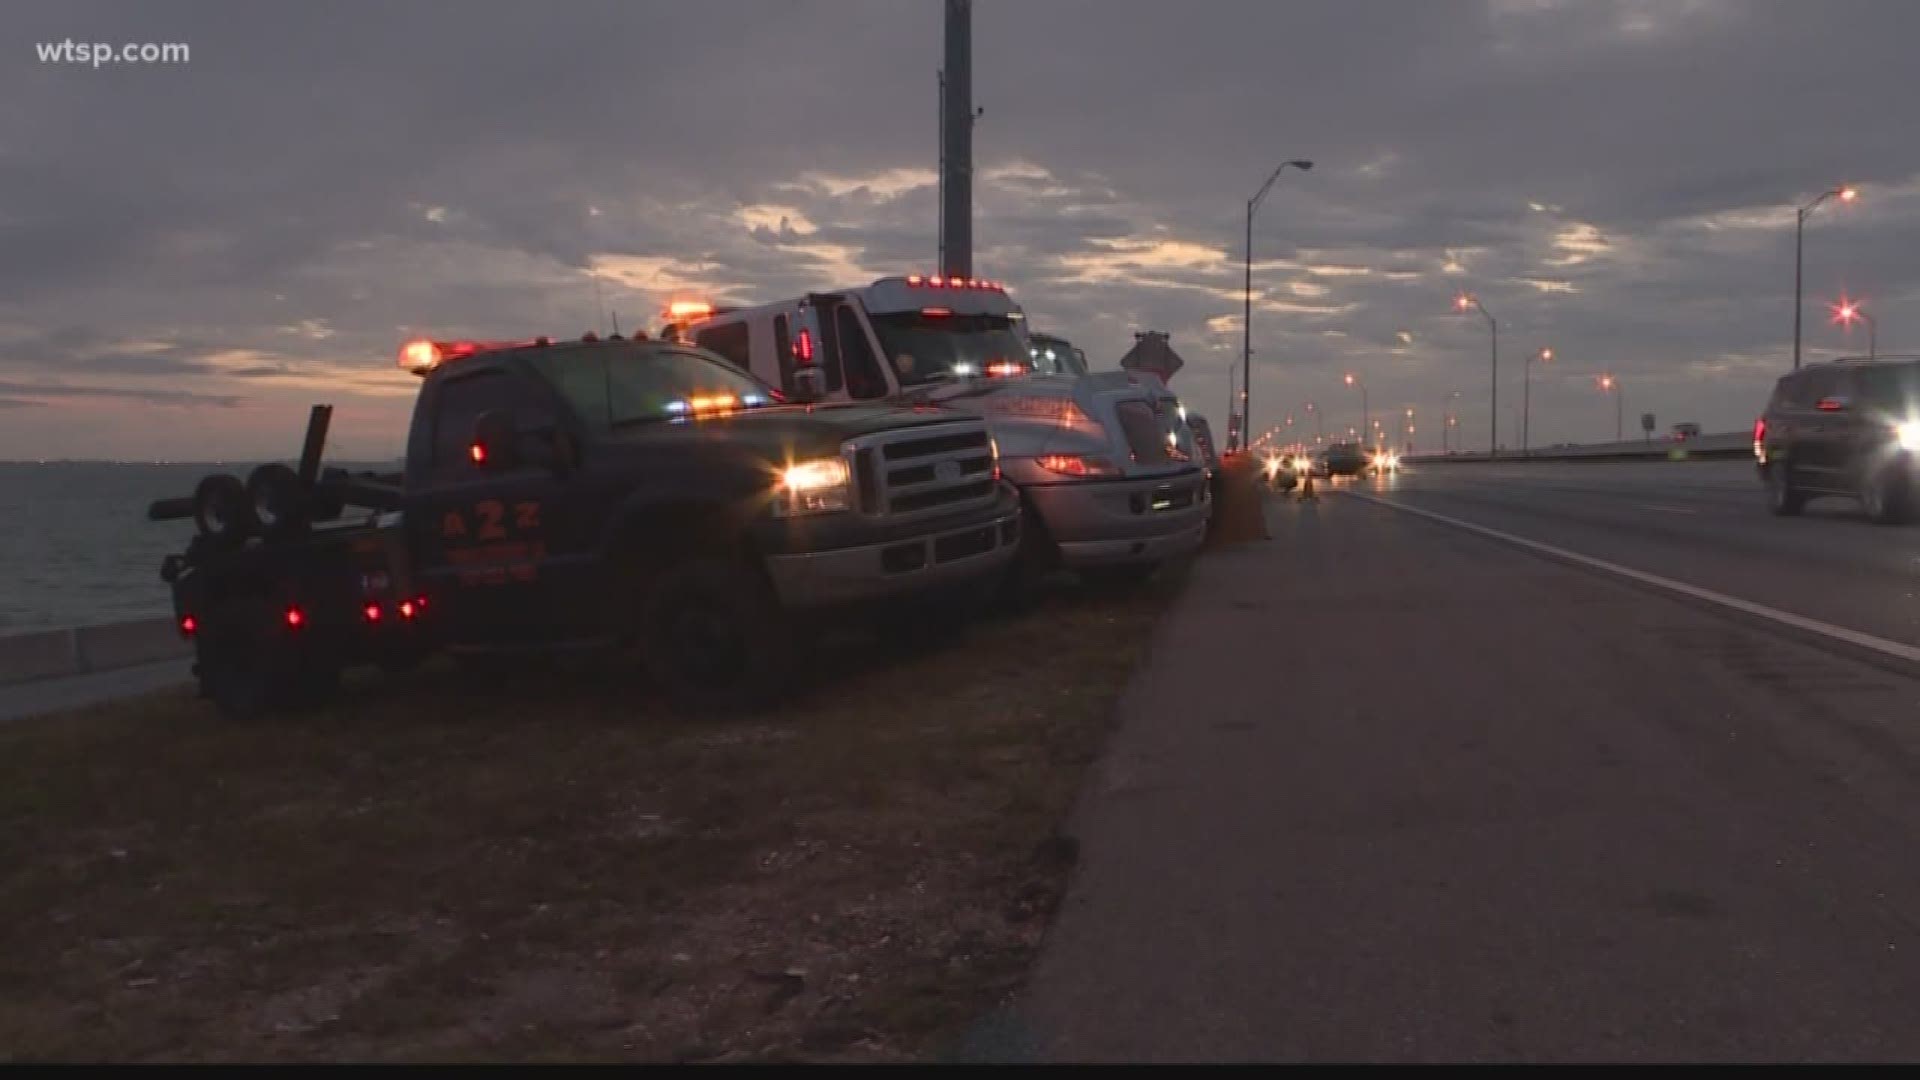 Tow truck operators from across Tampa Bay met up on the Howard Frankland Bridge to honor a tow truck driver who was hit and killed by a drunk driver.